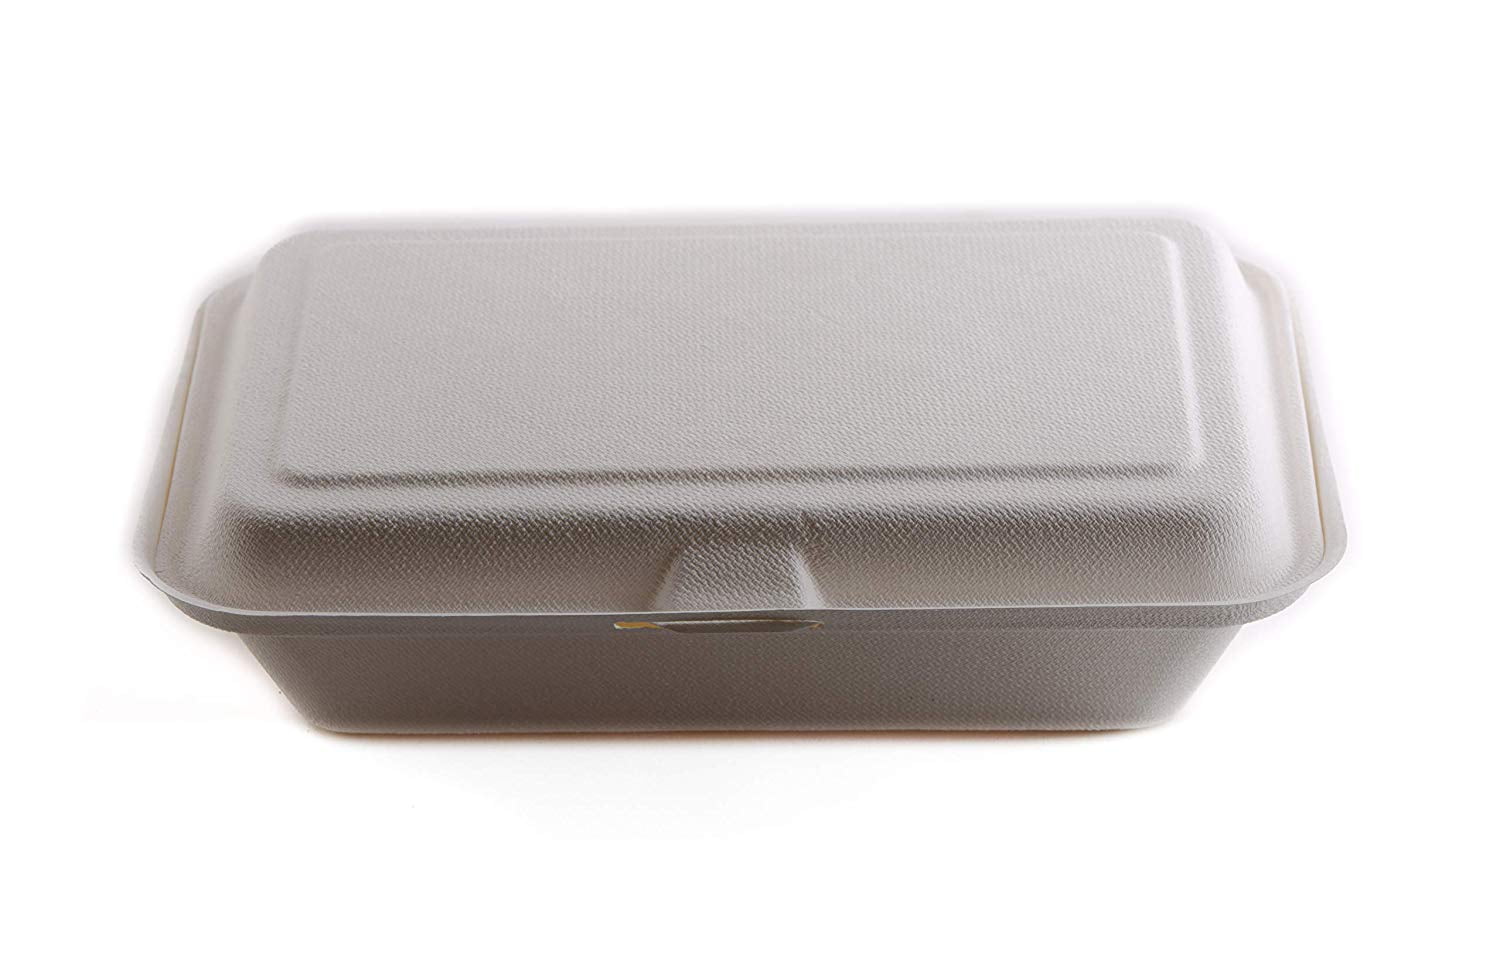 1000 Count - Biodegradable 9x6 Take Out Food Containers with Clamshell  Hinged Lid - Eco Friendly Sugarcane Bagasse 100% Compostable, Recyclable,  ToGo